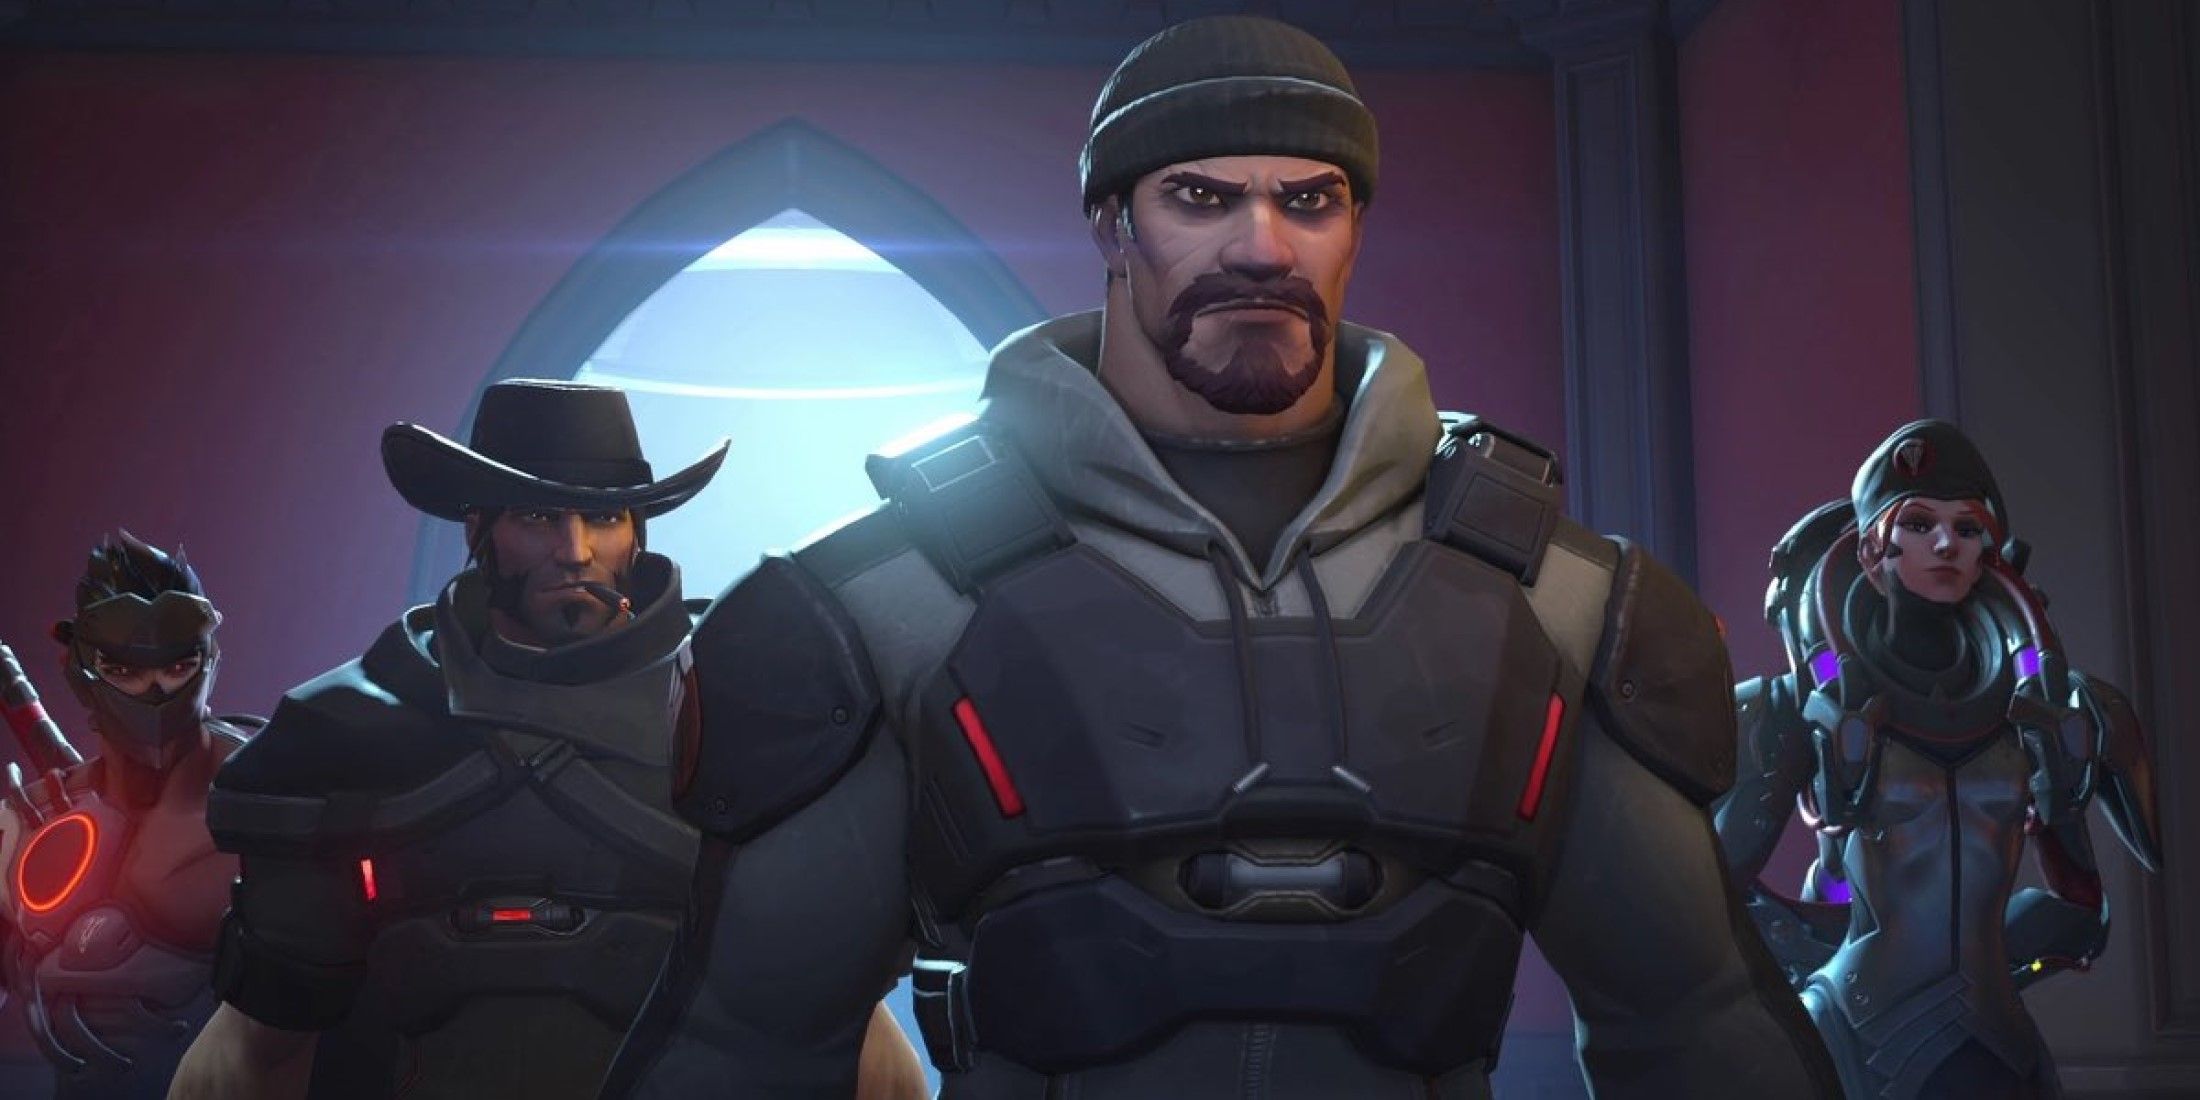 reaper cassidy genji and moira from blackwatch in ow2